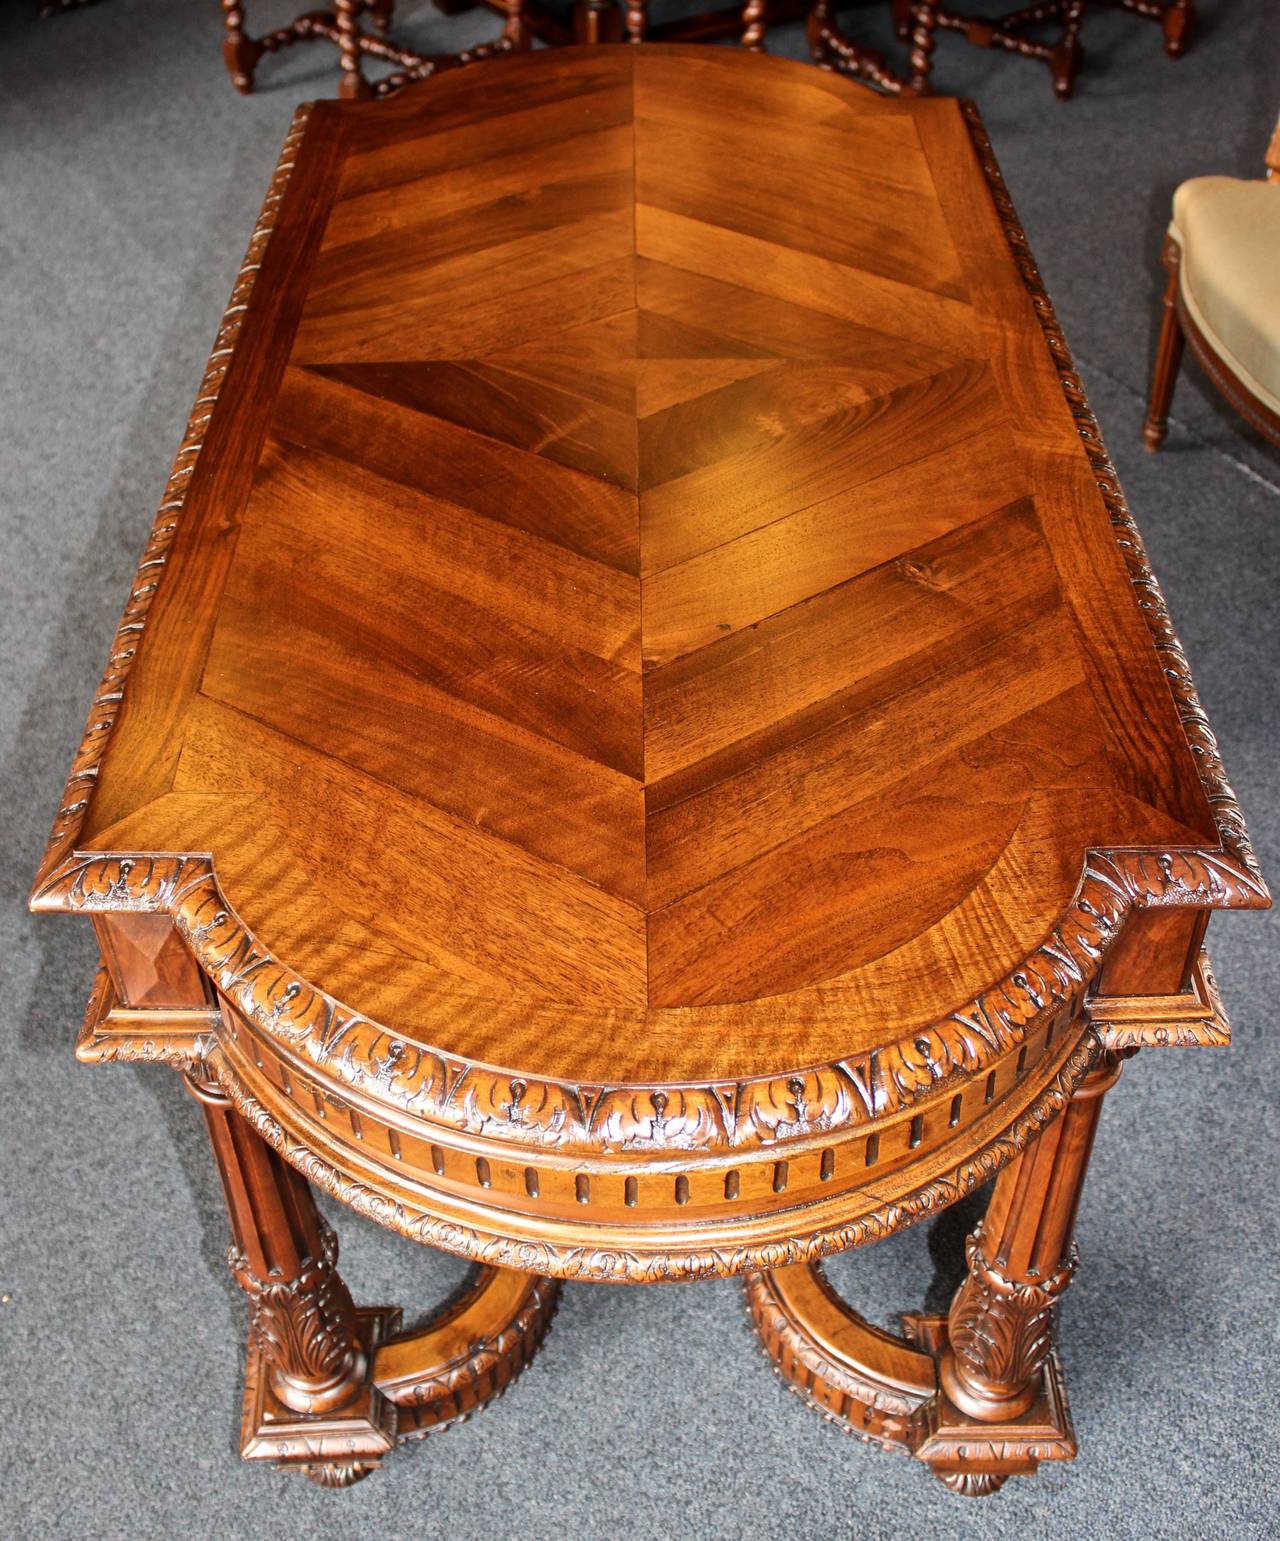 Early 20th Century French Decorative Table In Good Condition For Sale In Santa Ana, CA